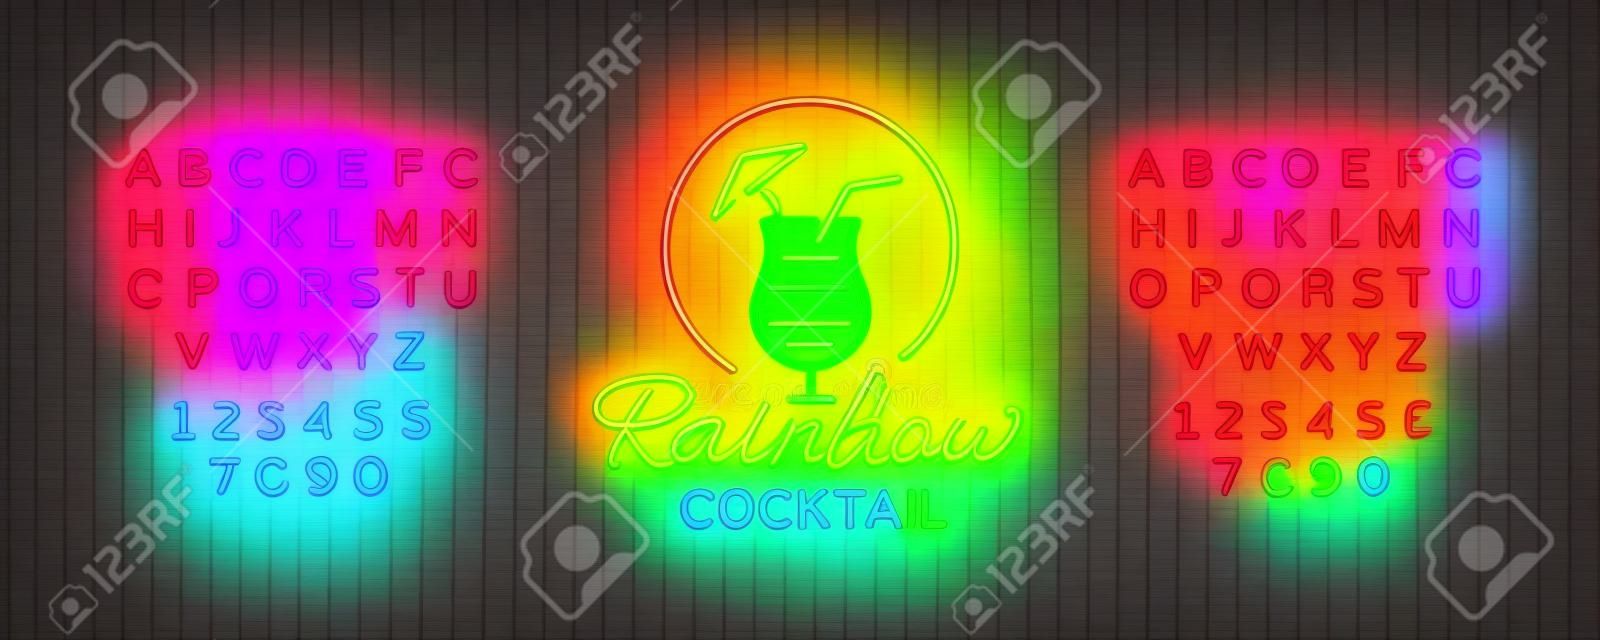 Cocktail logo in neon style. Rainbow Cocktail. Neon sign, Design template for drinks, alcoholic. Light banner, Bright advertising for cocktail bar, party. Vector illustration. Editing text neon sign.